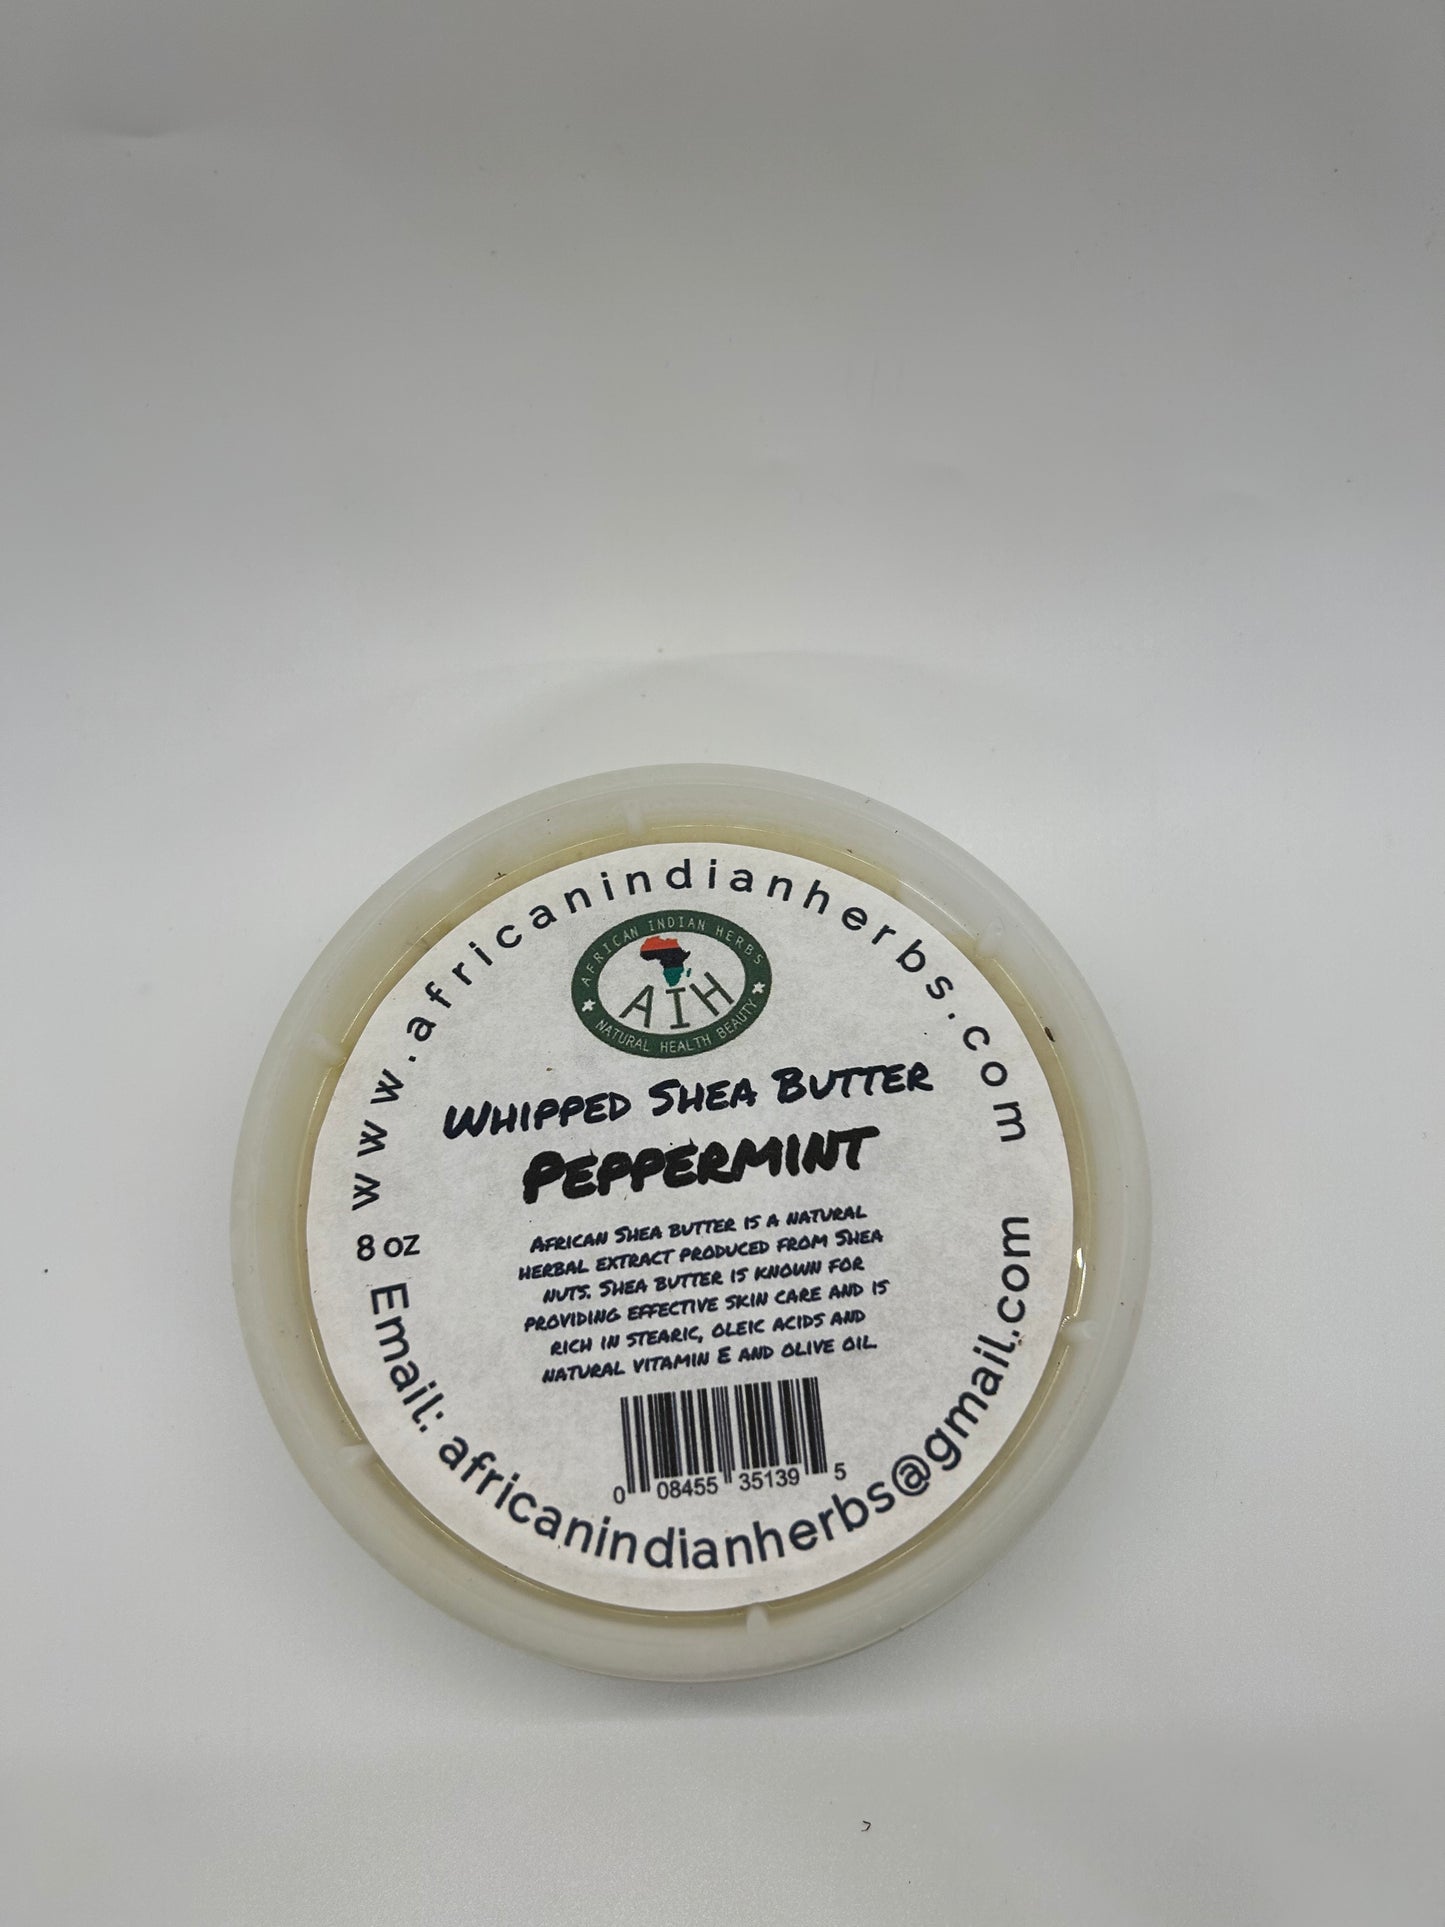 Peppermint whipped shea butter